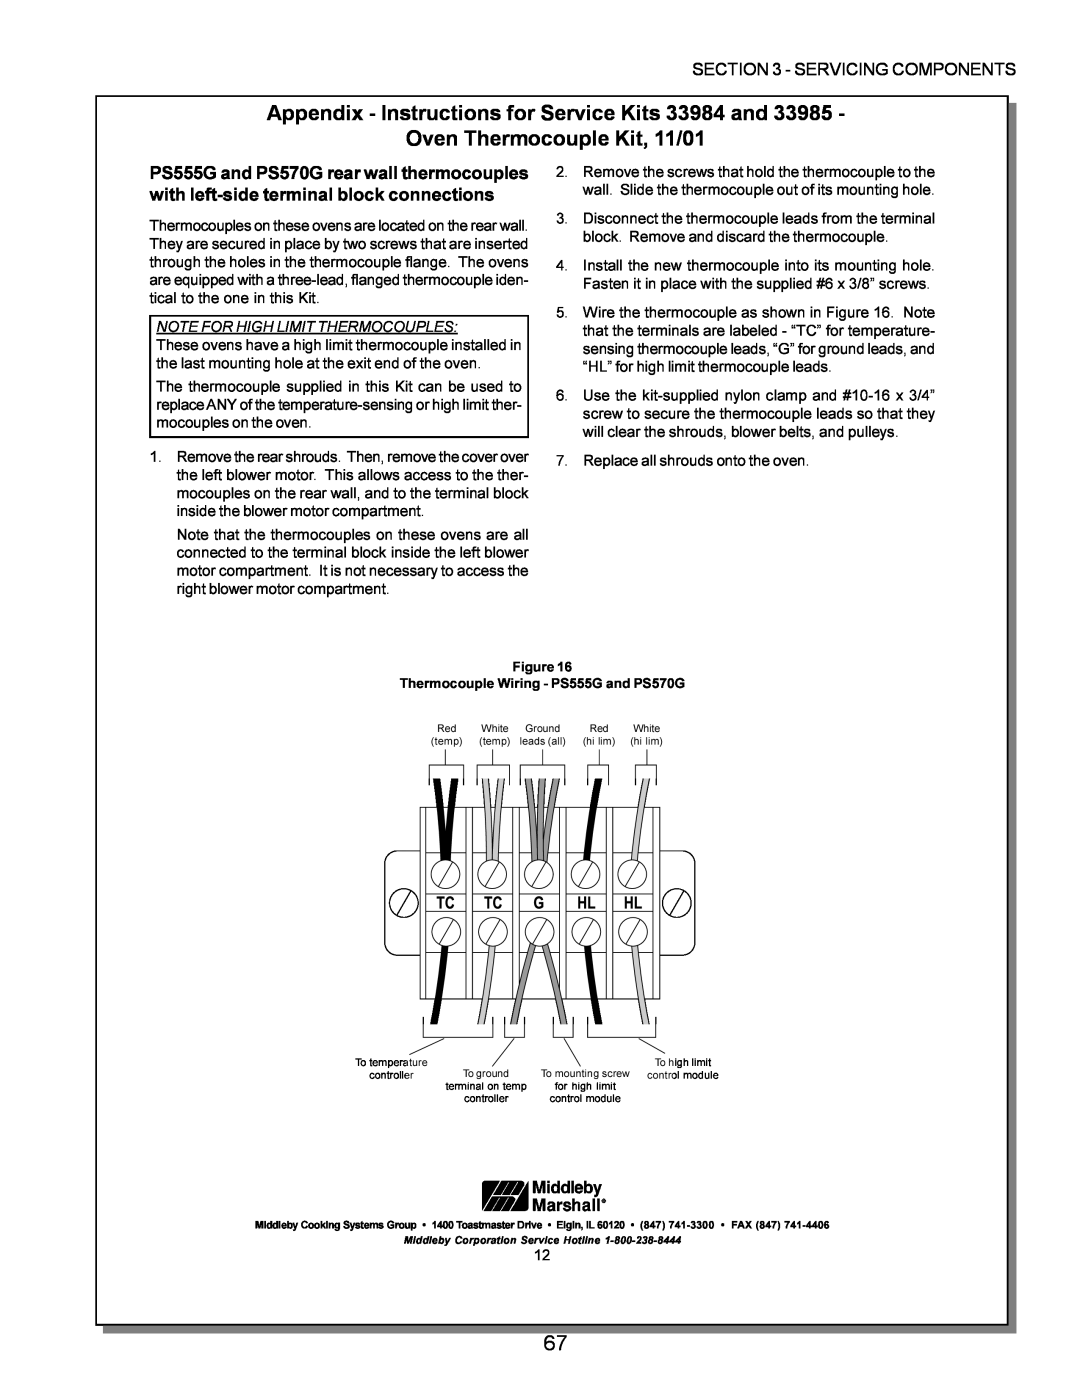 Middleby Marshall PS200, PS570, PS360 manual Appendix - Instructions for Service Kits 33984 and, Oven Thermocouple Kit, 11/01 